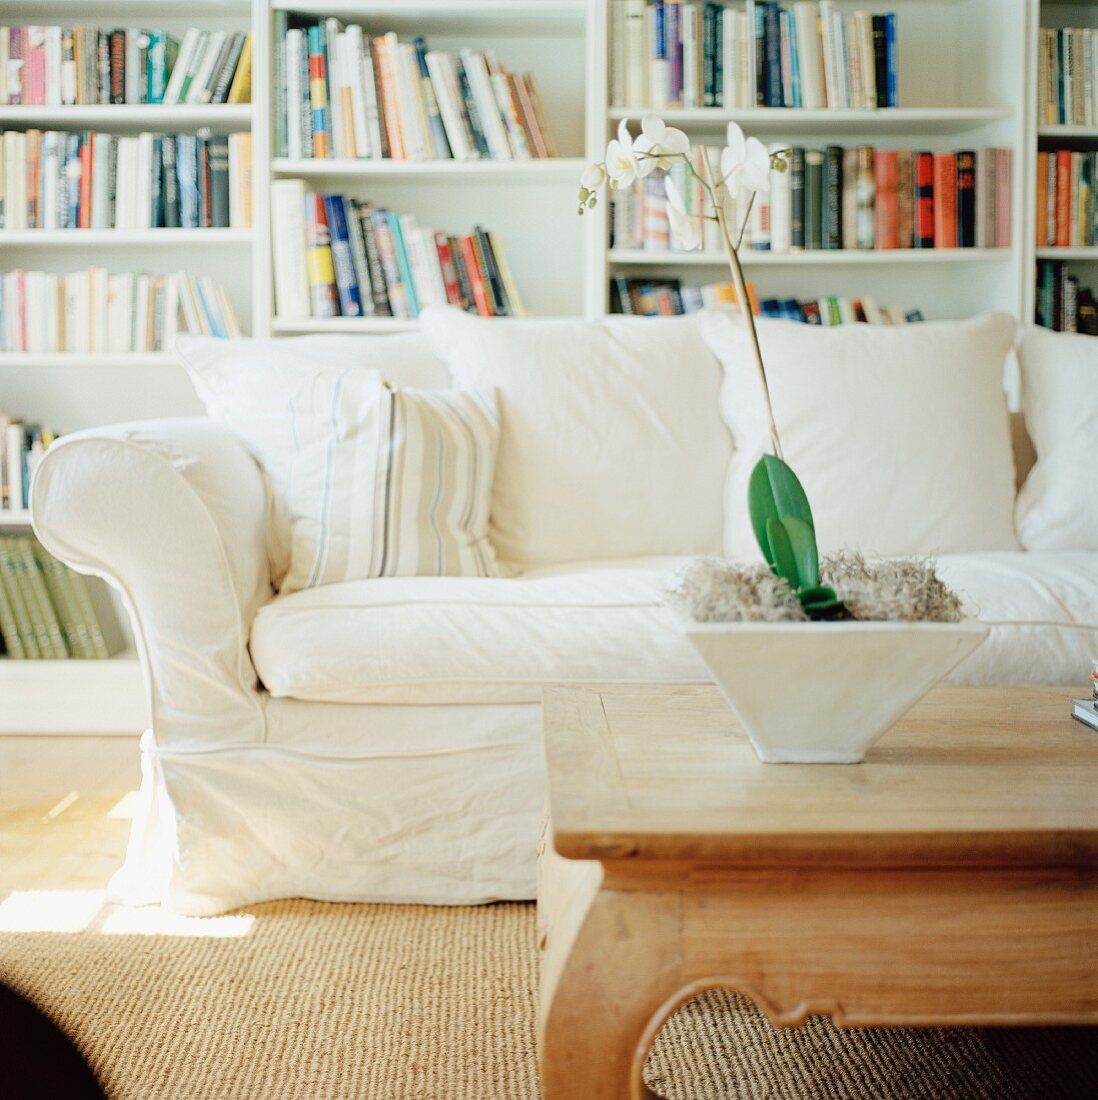 White sofa & wooden coffee table in front of bookshelves on wall